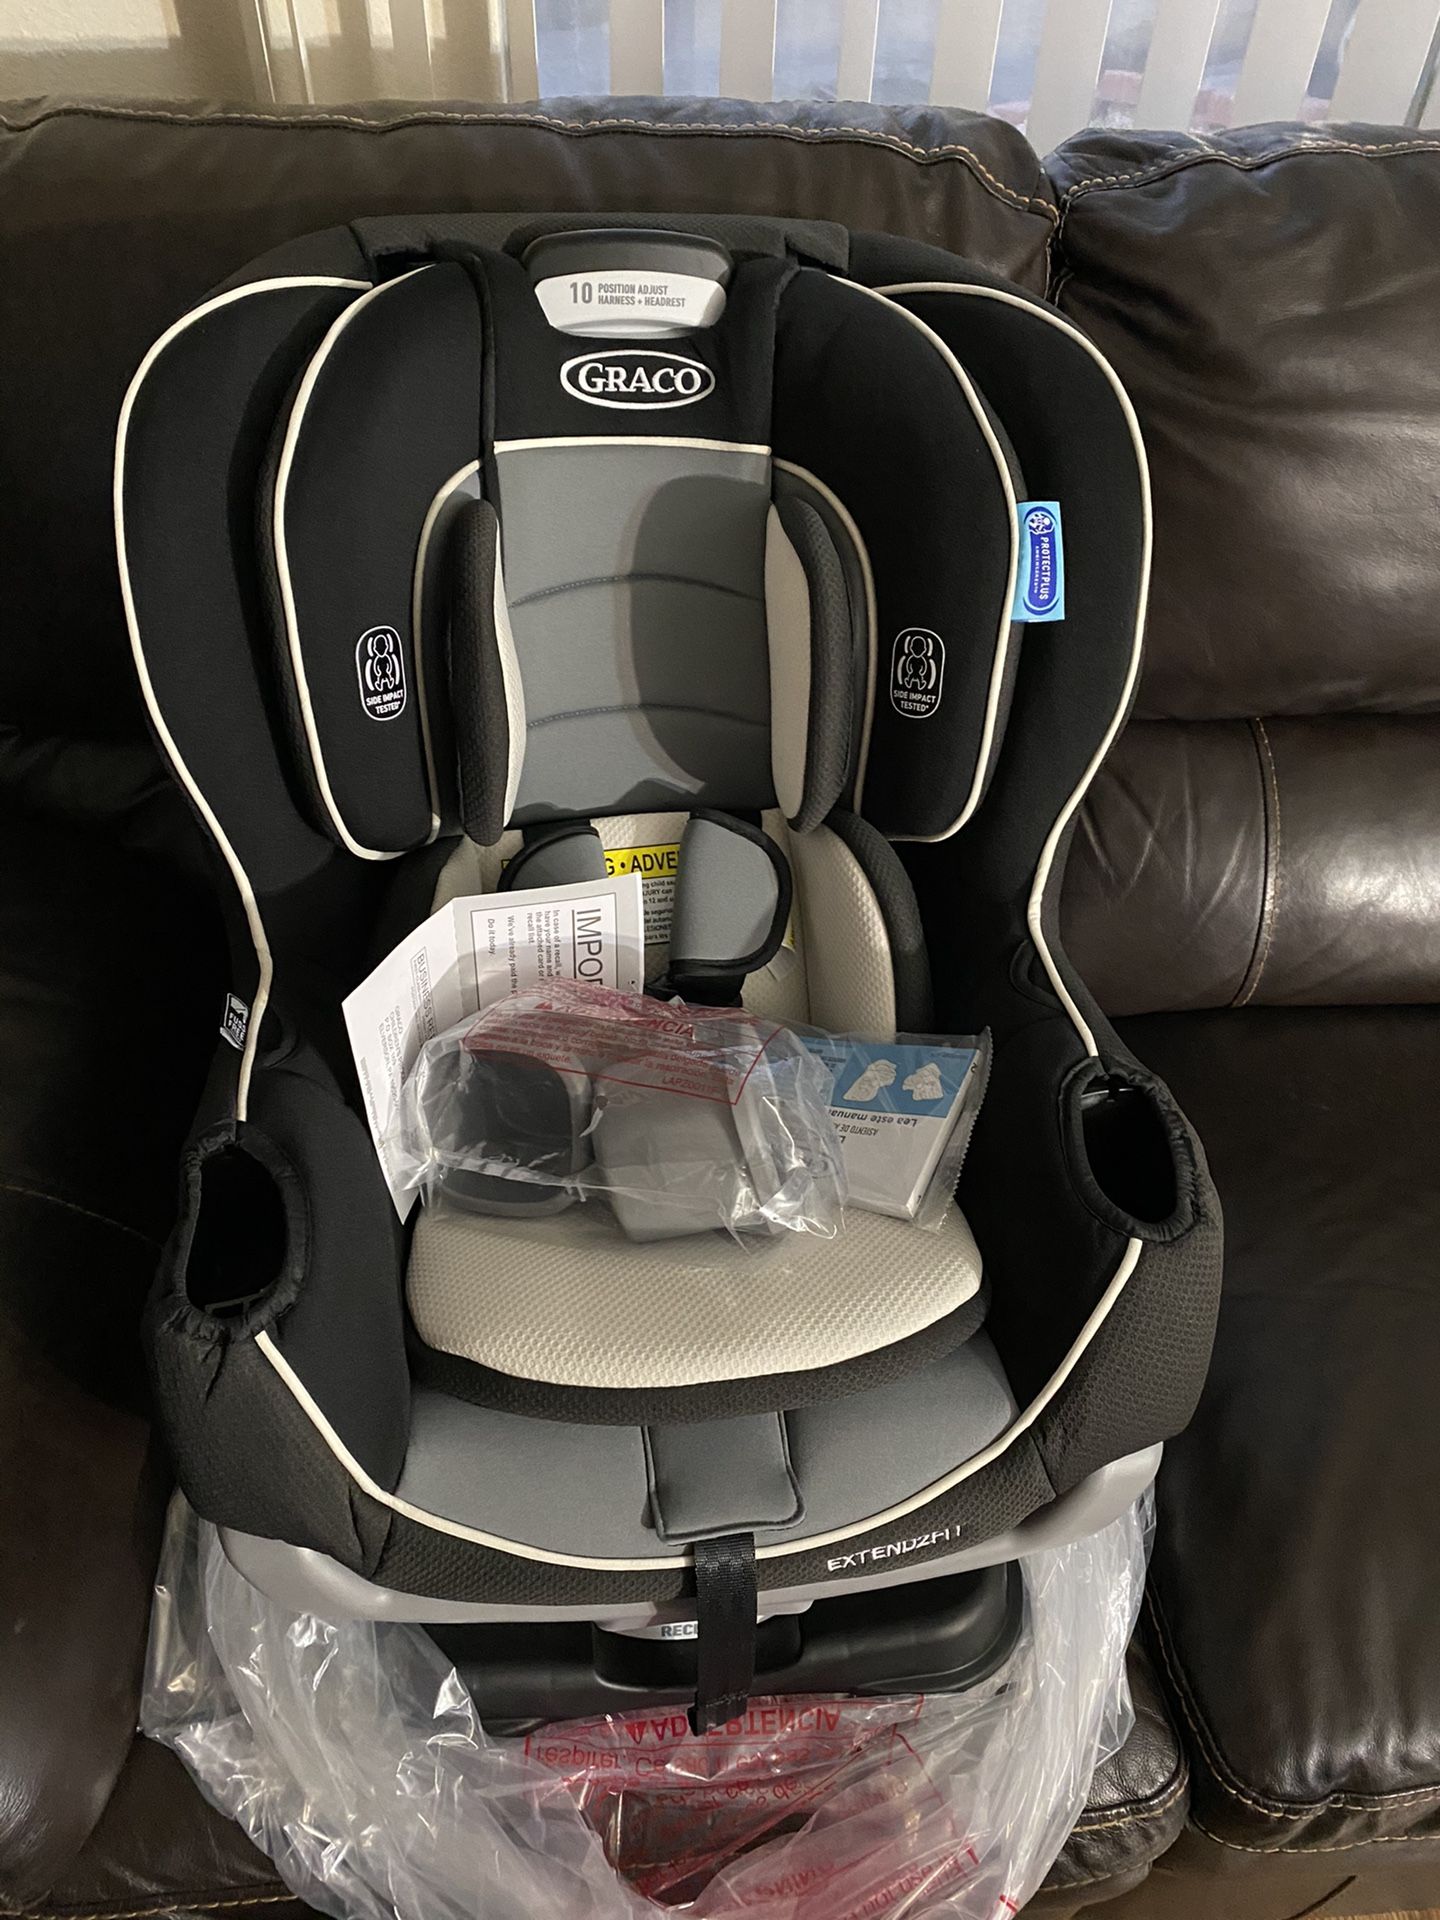 Graco extend2fit car seat